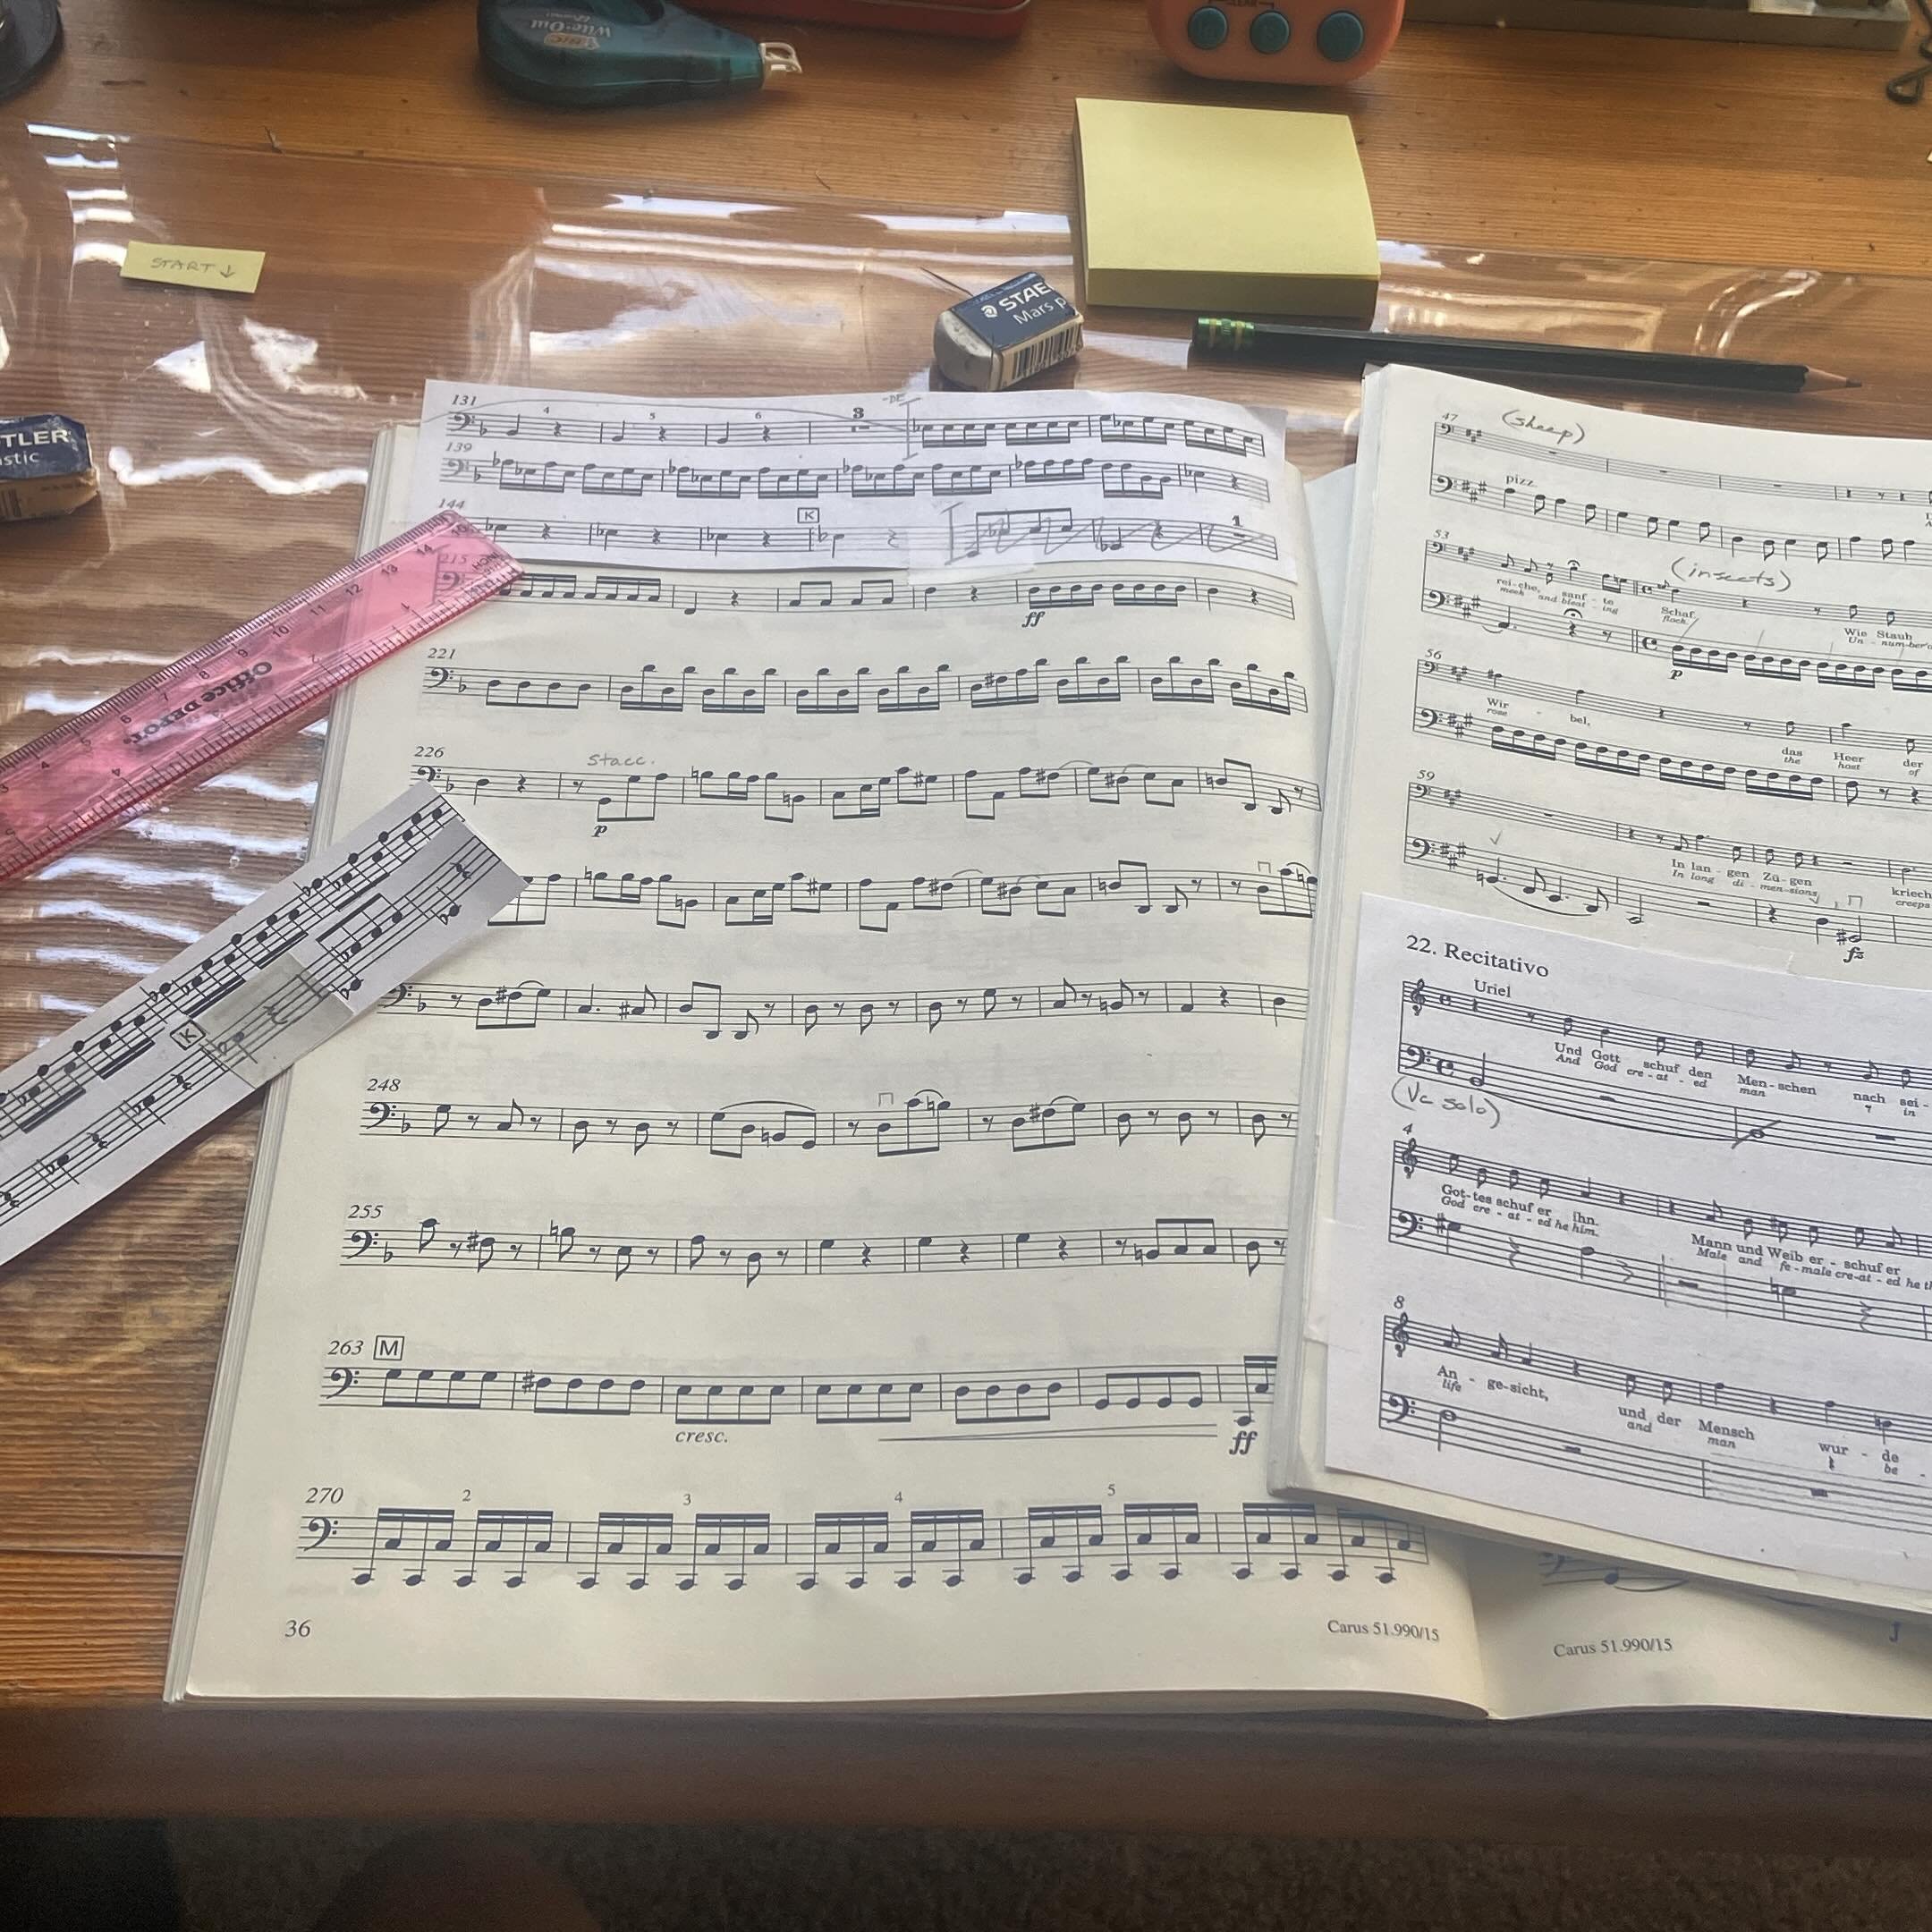 Got to do some fun arts and crafts library work on Haydn&rsquo;s &ldquo;Creation&rdquo; today!

#library #musician #librarian #orchestrallibrarian #orchestralibrary #orchdork #bandgeek